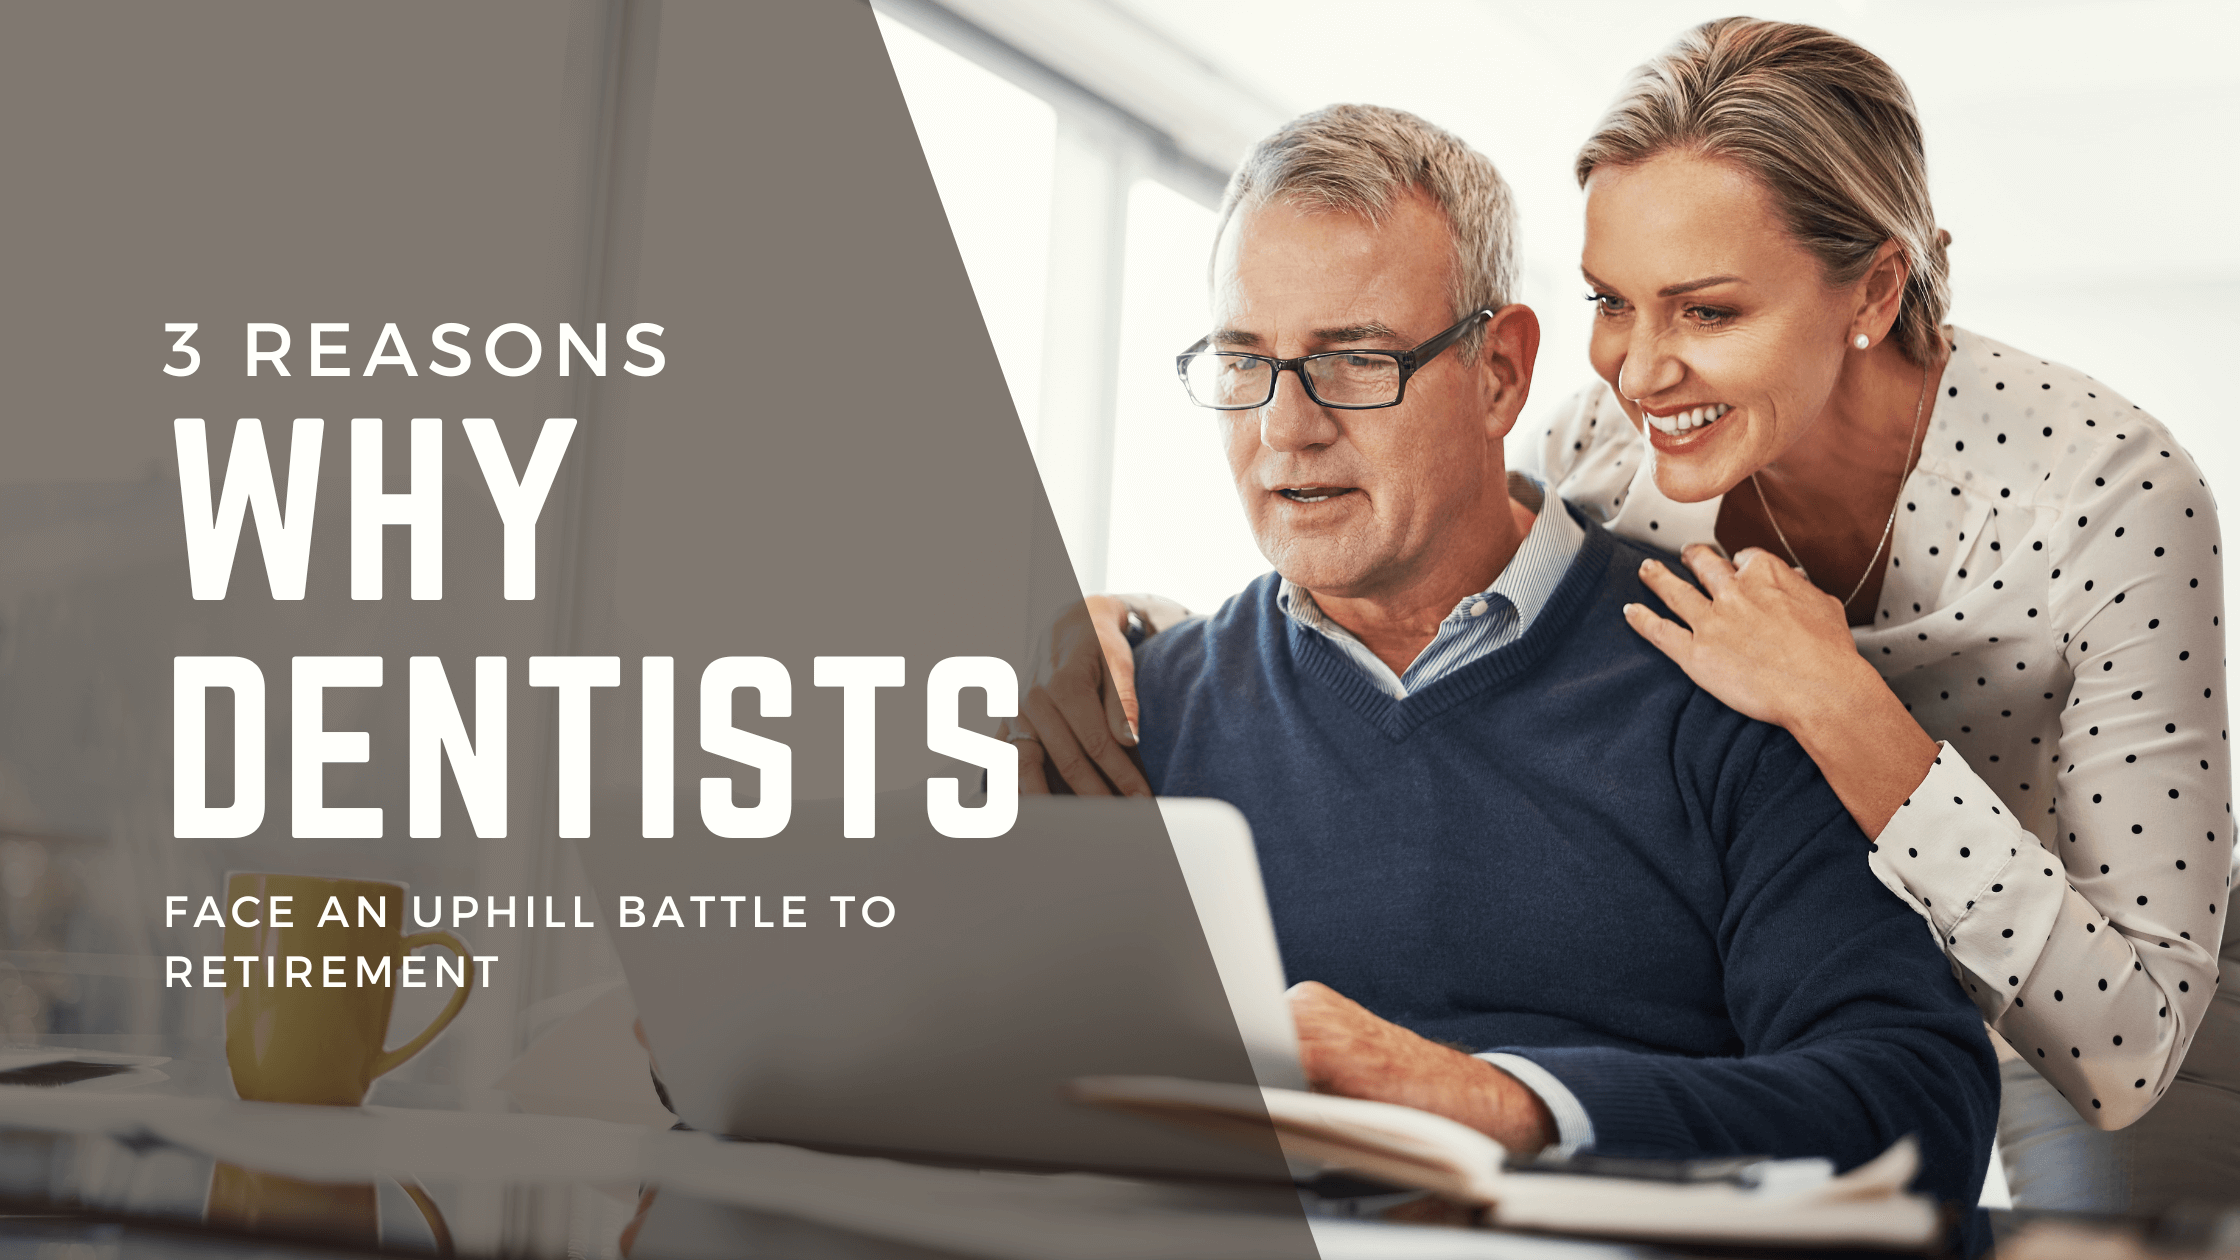 3 Reasons Why Dentists Face an Uphill Battle to Retirement